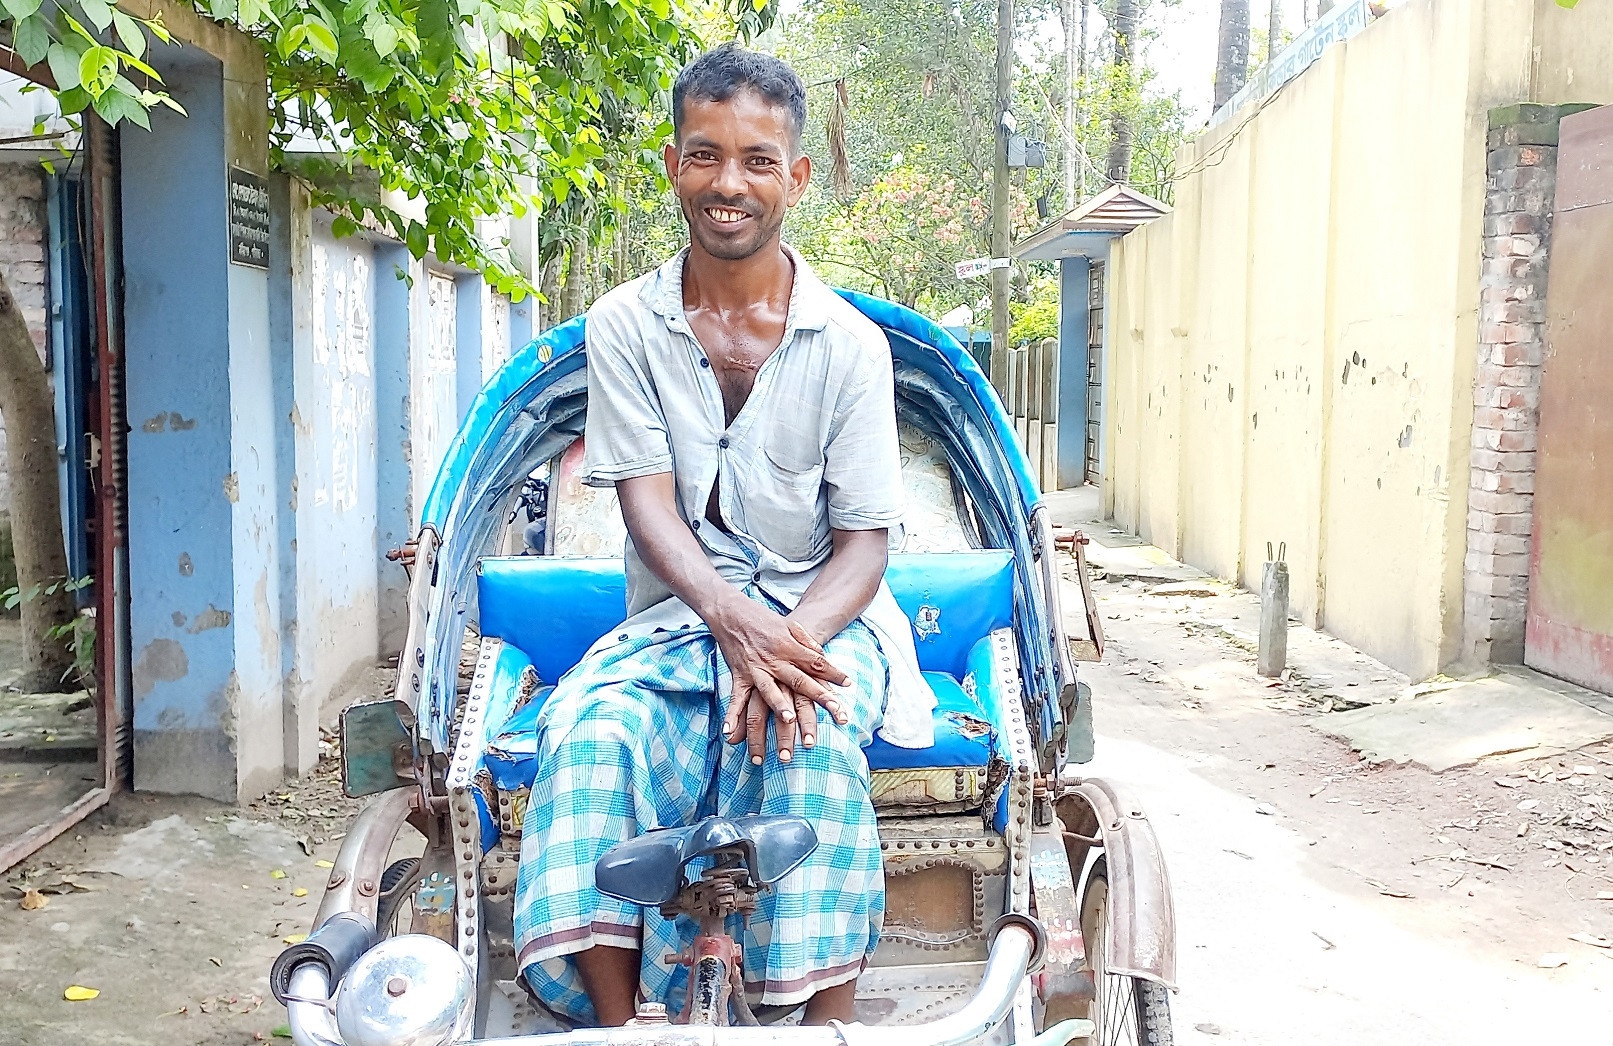 How long will a disabled rickshaw puller’s financial hardship last?